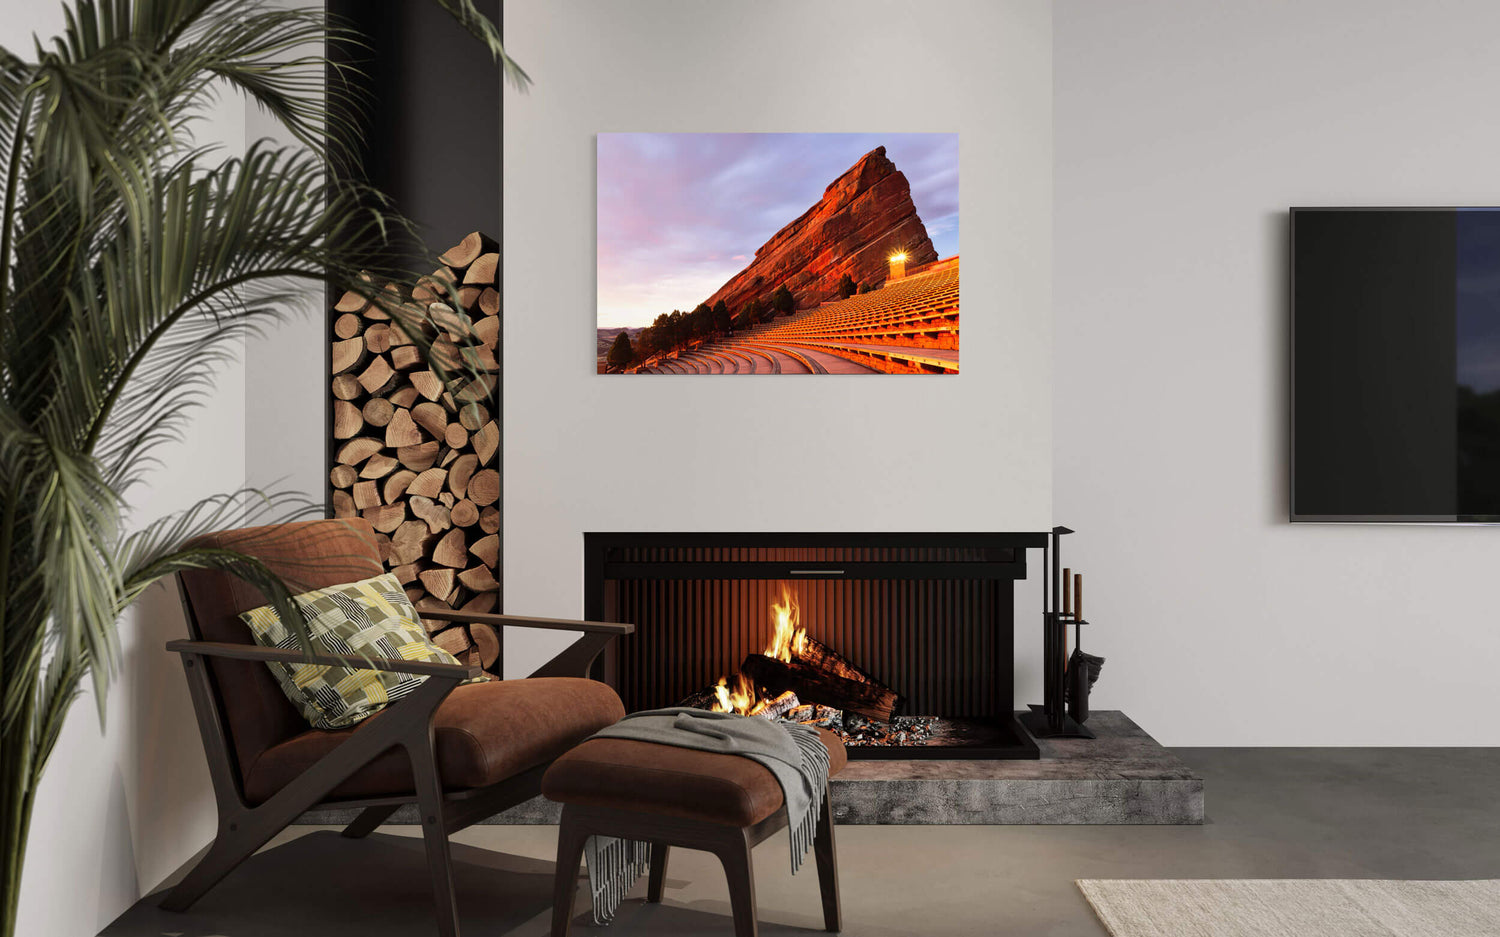 A Red Rocks Amphitheater picture from Denver, Colorado, hangs in a living room.